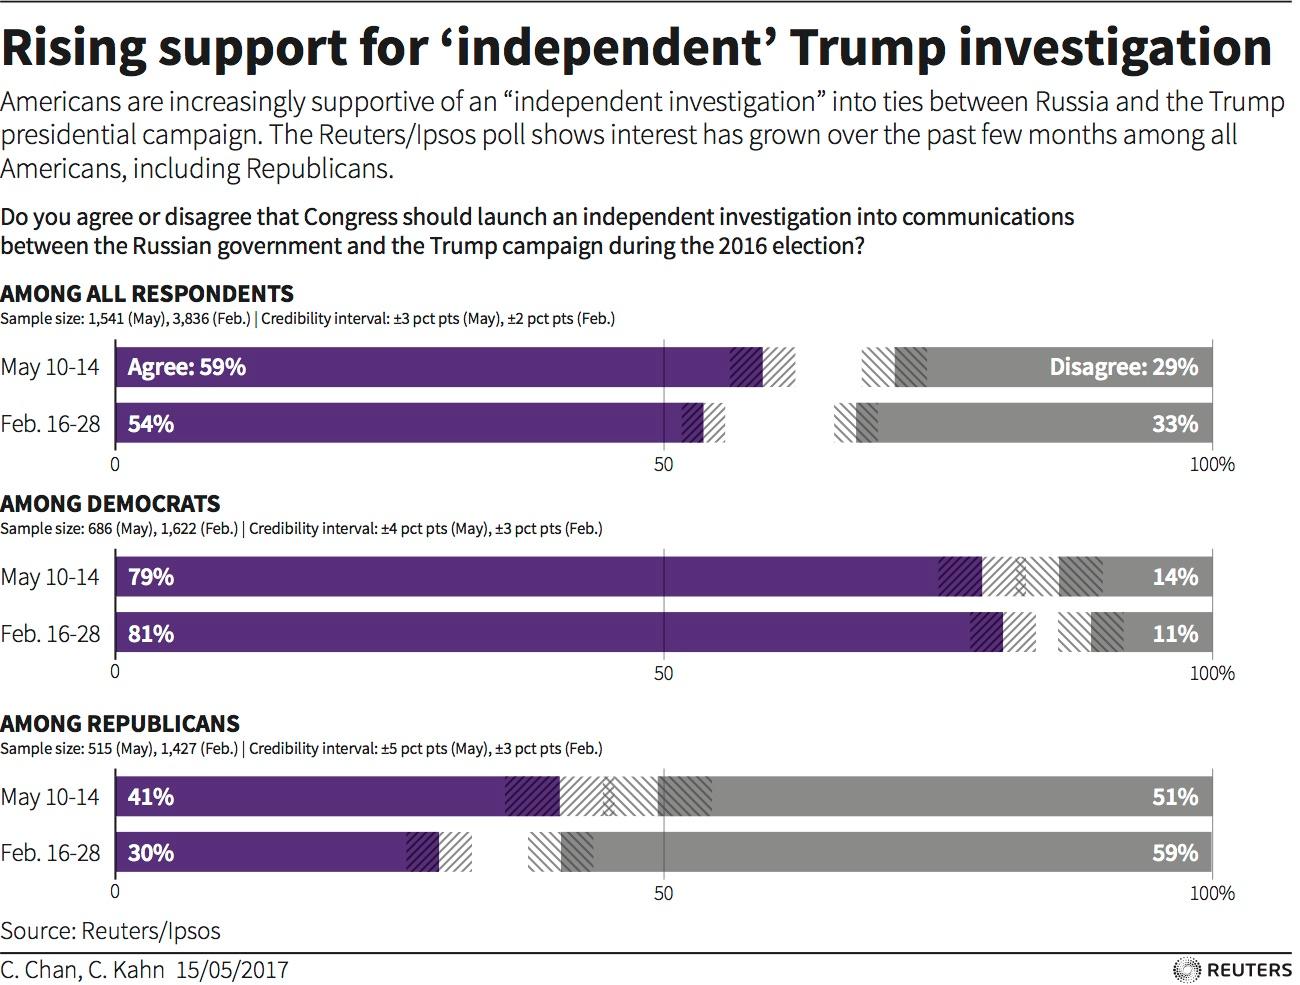 Americans want independent Russia investigation